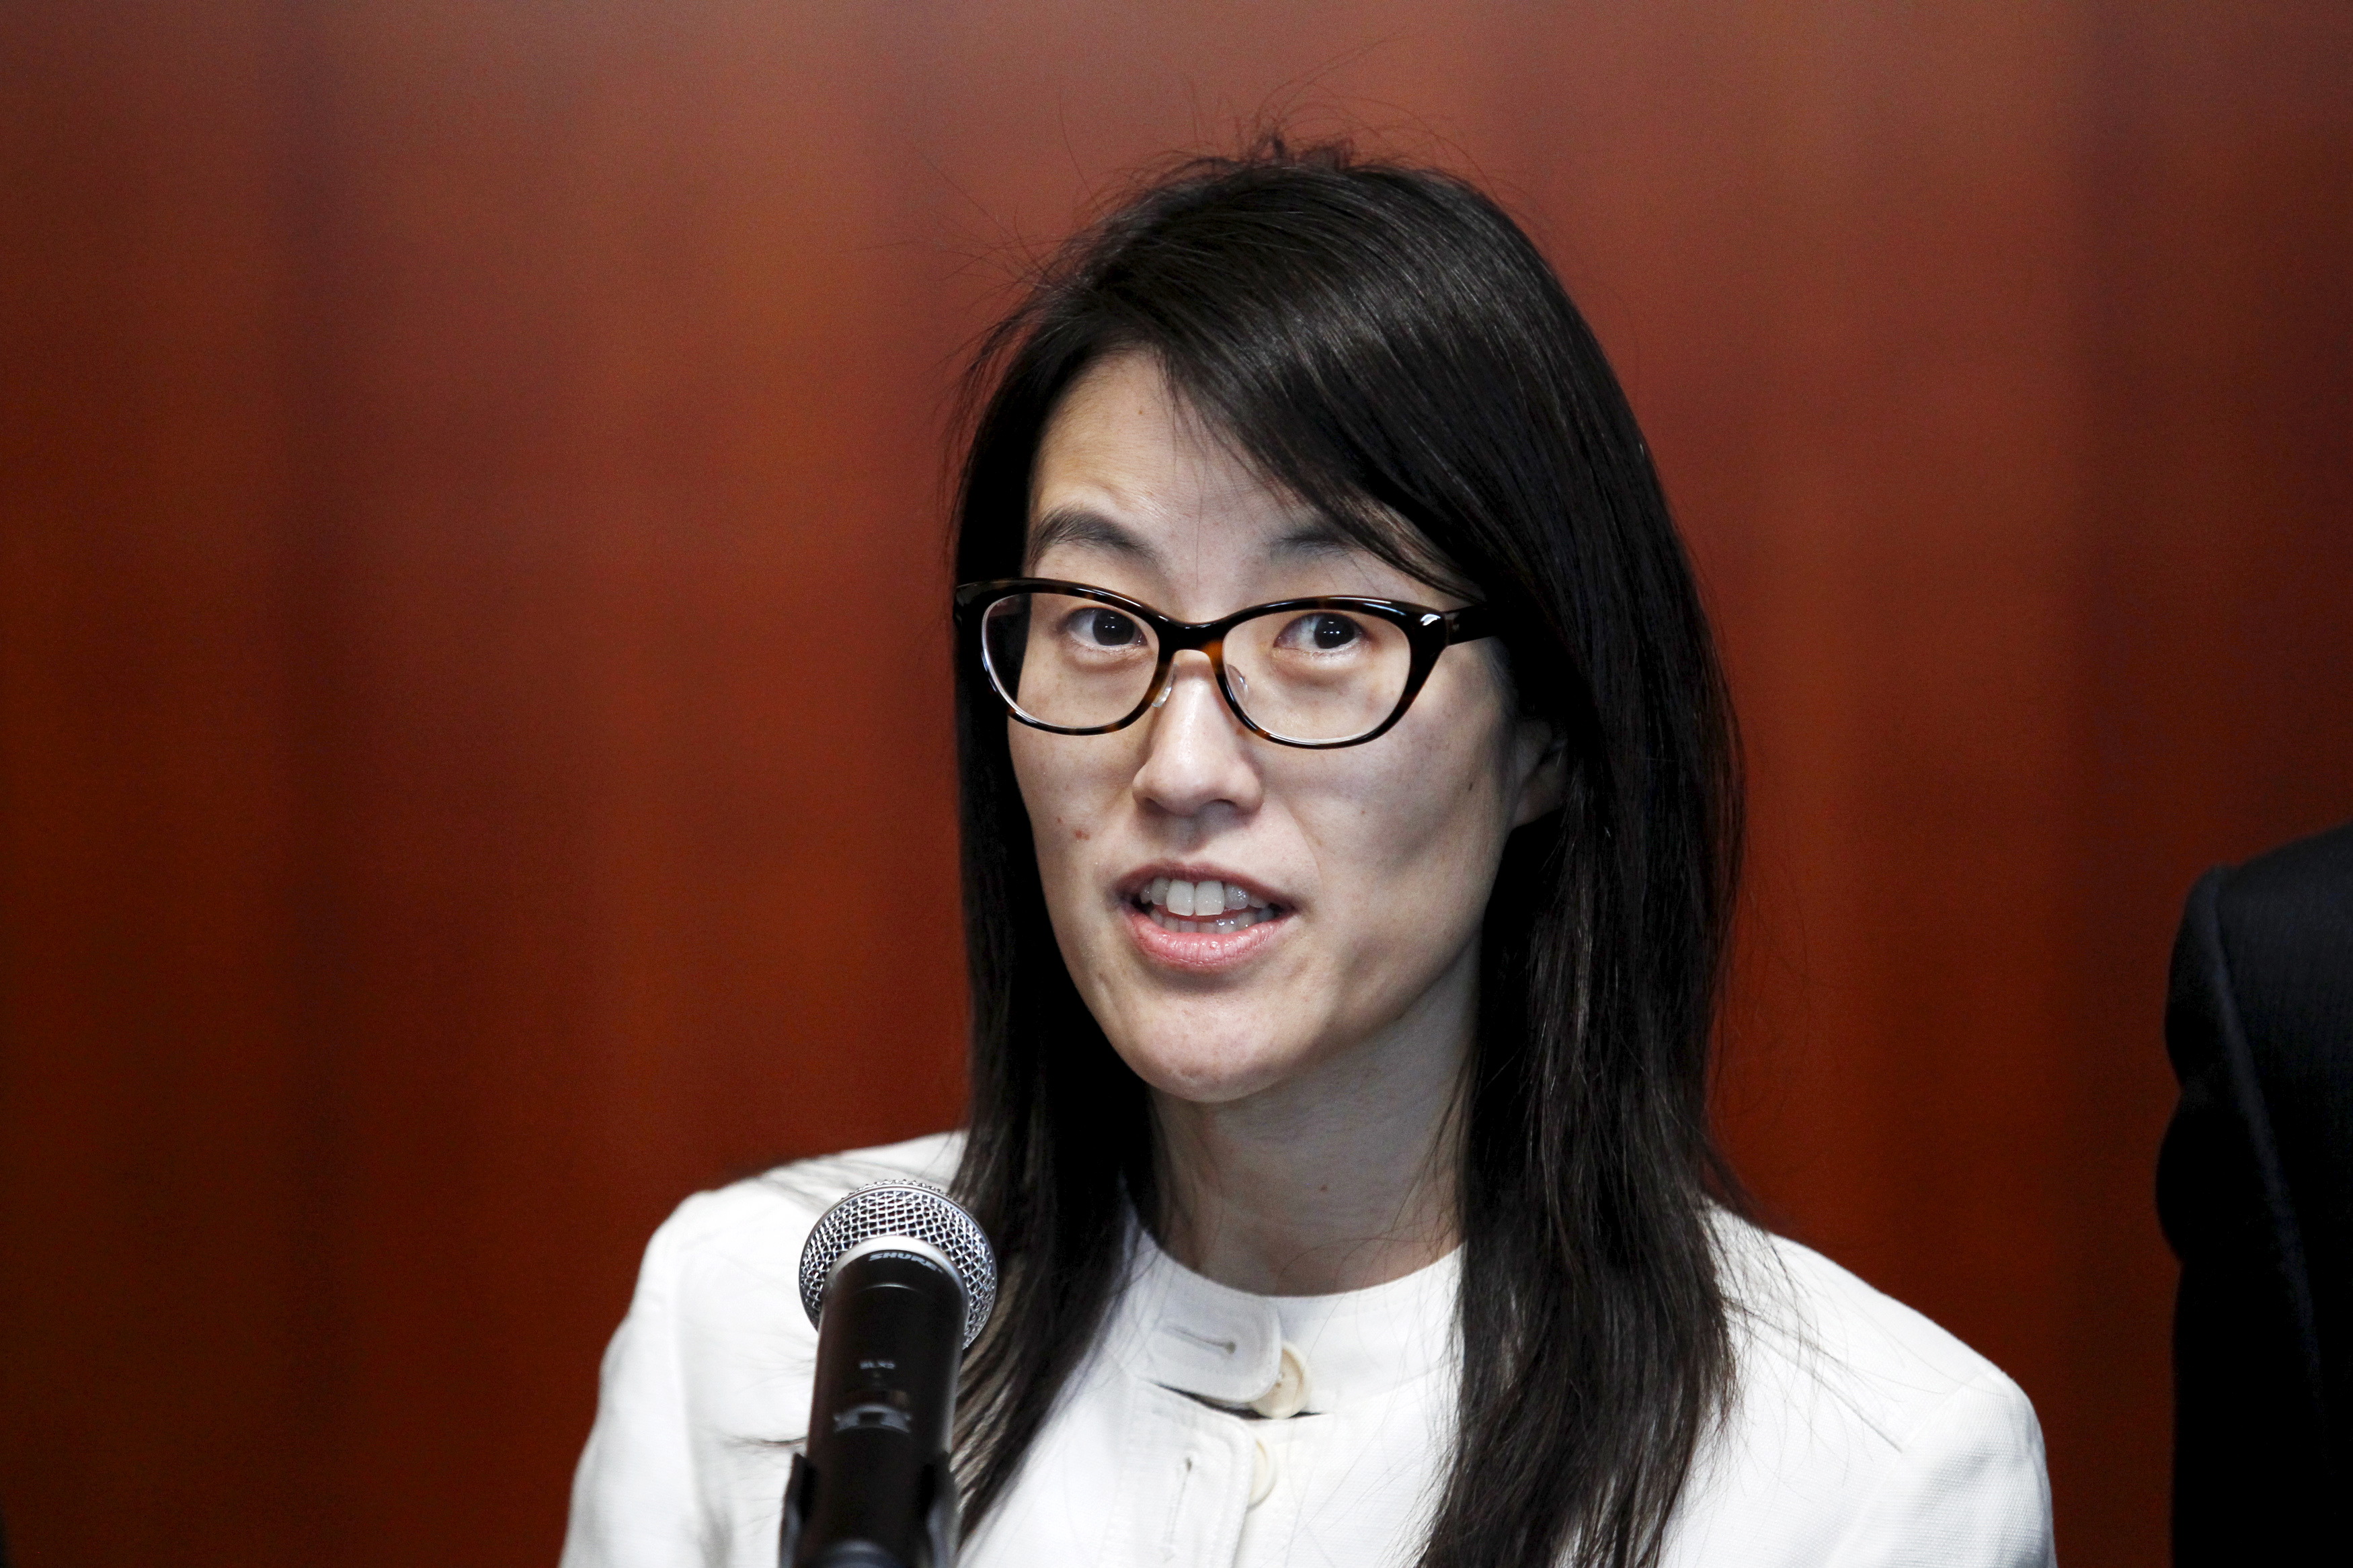 Ellen Pao speaking to the media after losing her high profile gender discrimination lawsuit against venture capital firm Kleiner, Perkins, Caufield and Byers in San Francisco, on March 27, 2015. (Beck Diefenbach—Reuters)